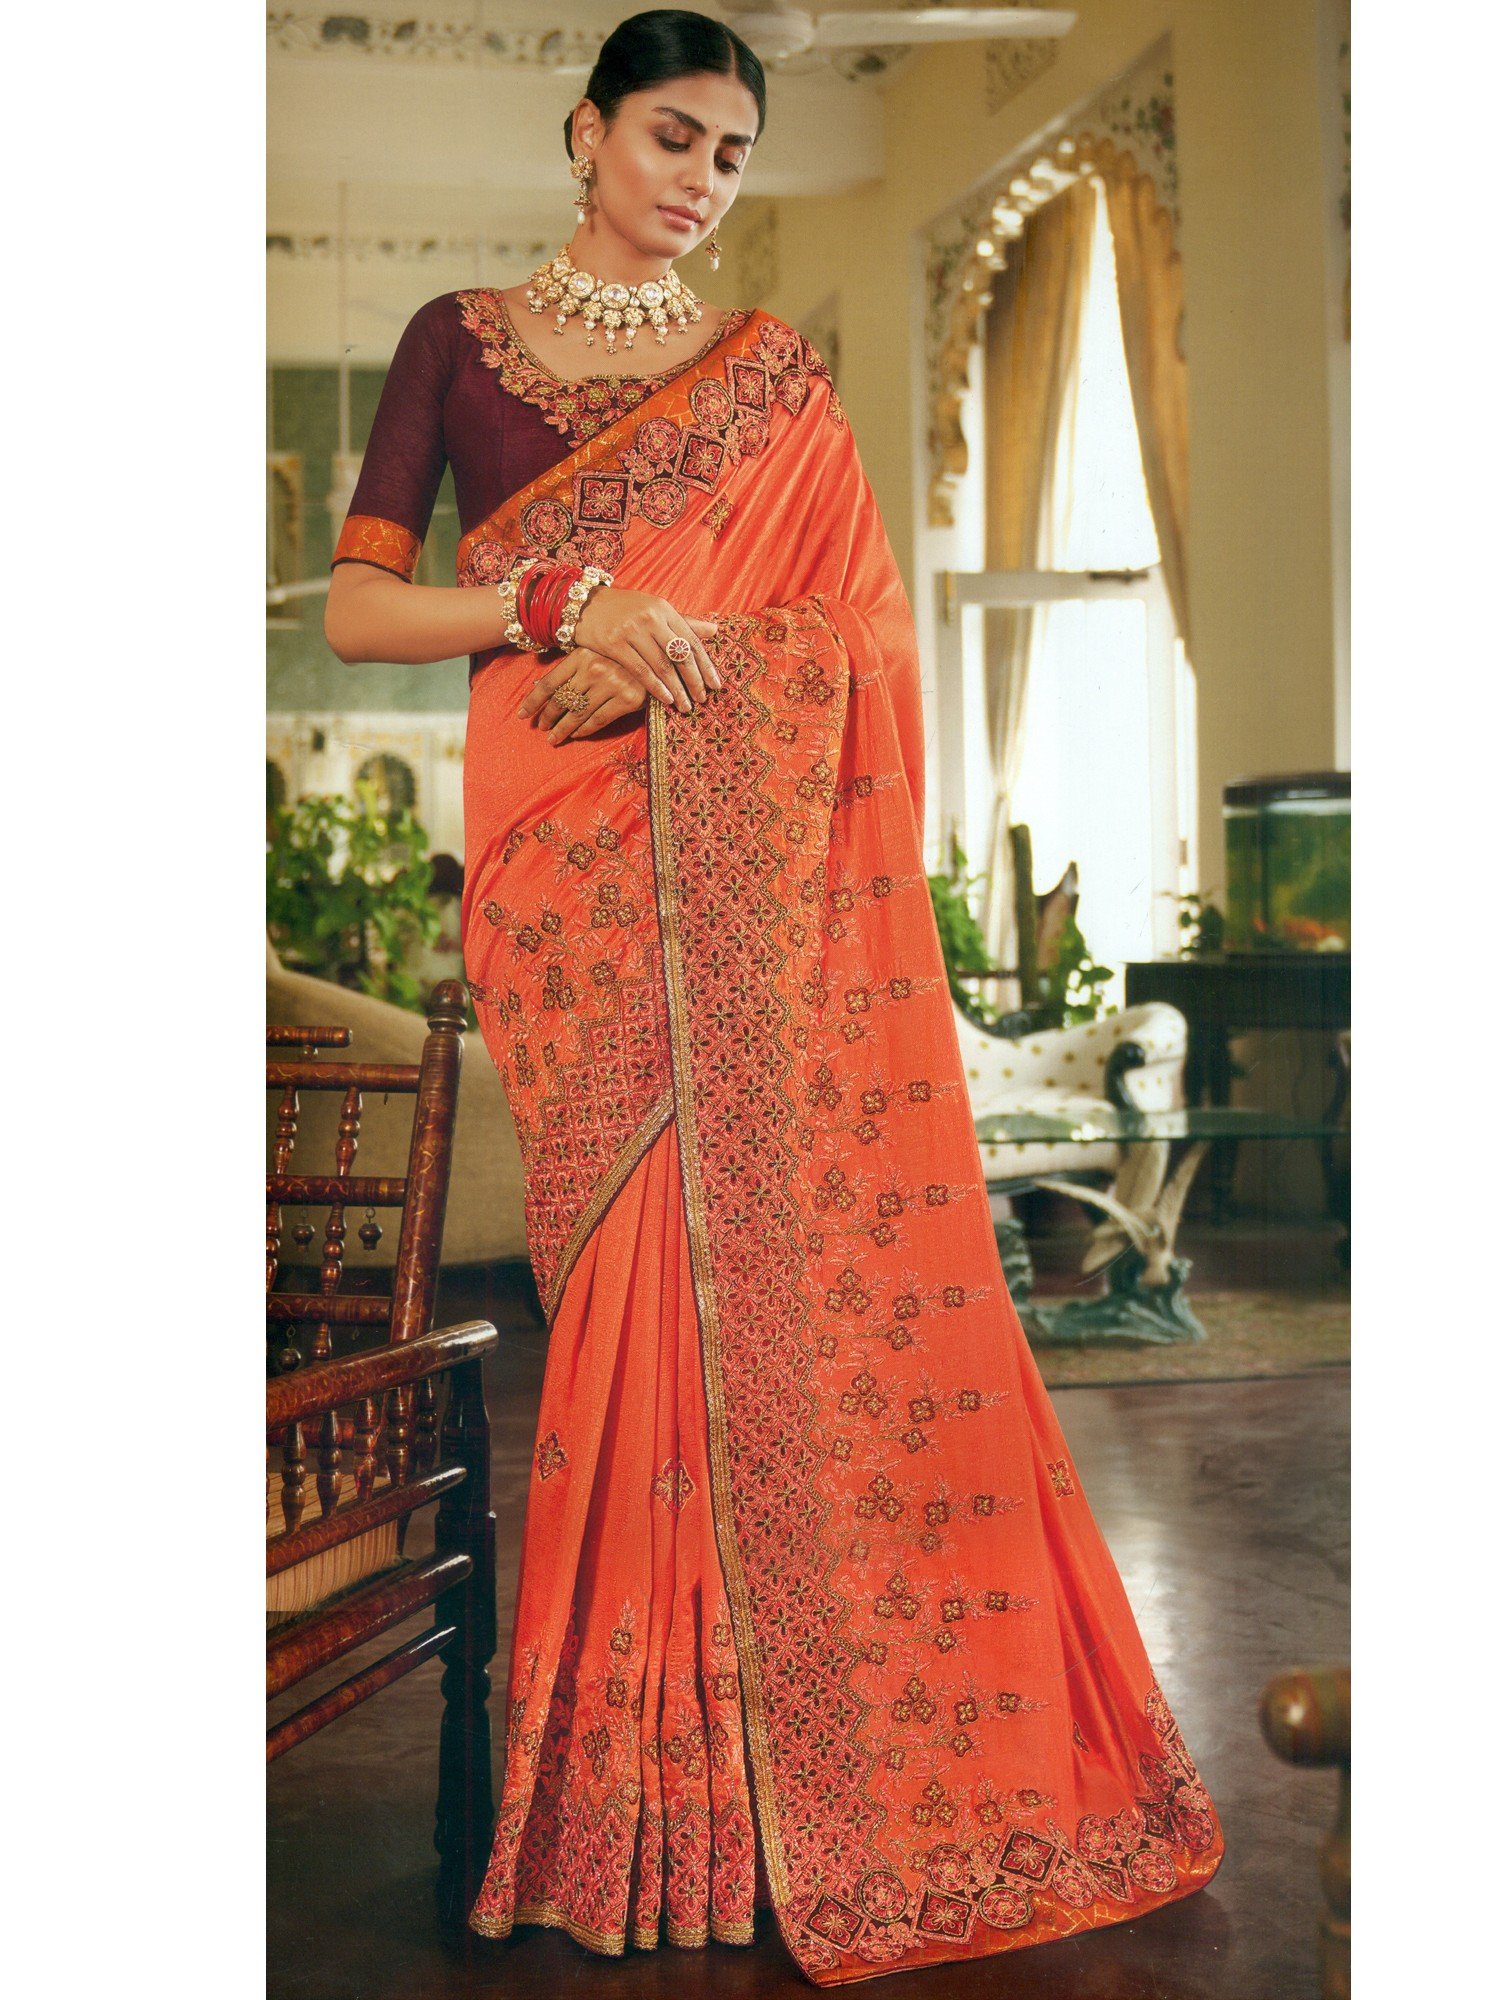 New Arrival Women Party Wear Saree at Rs.1599/Piece in gandhinagar offer by  Jenny Fashion